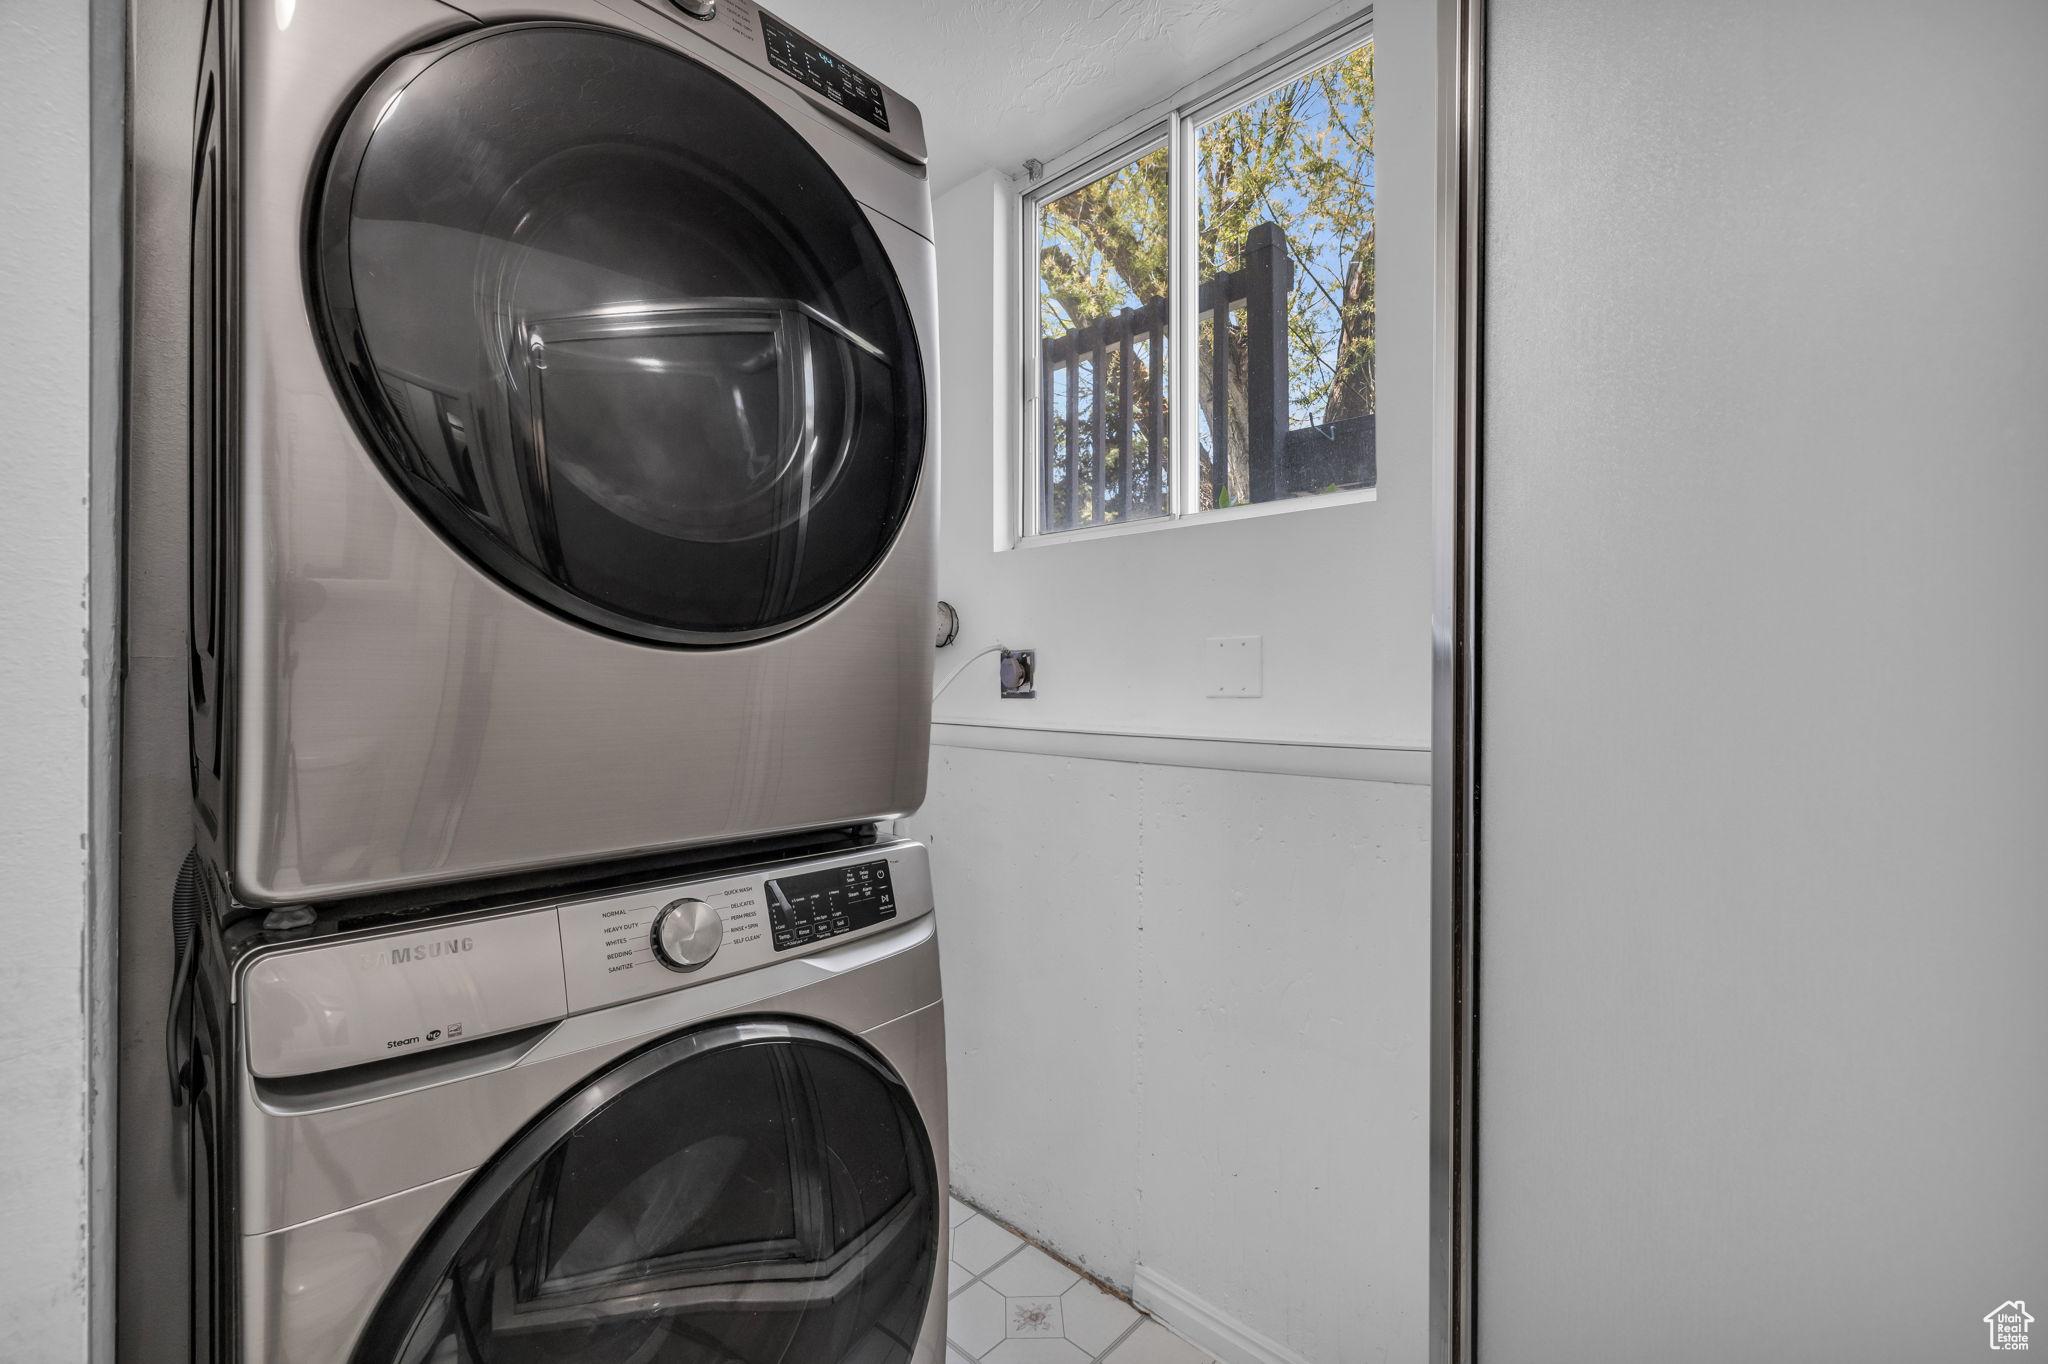 Laundry in basement bathroom. Washer and Dryer included.